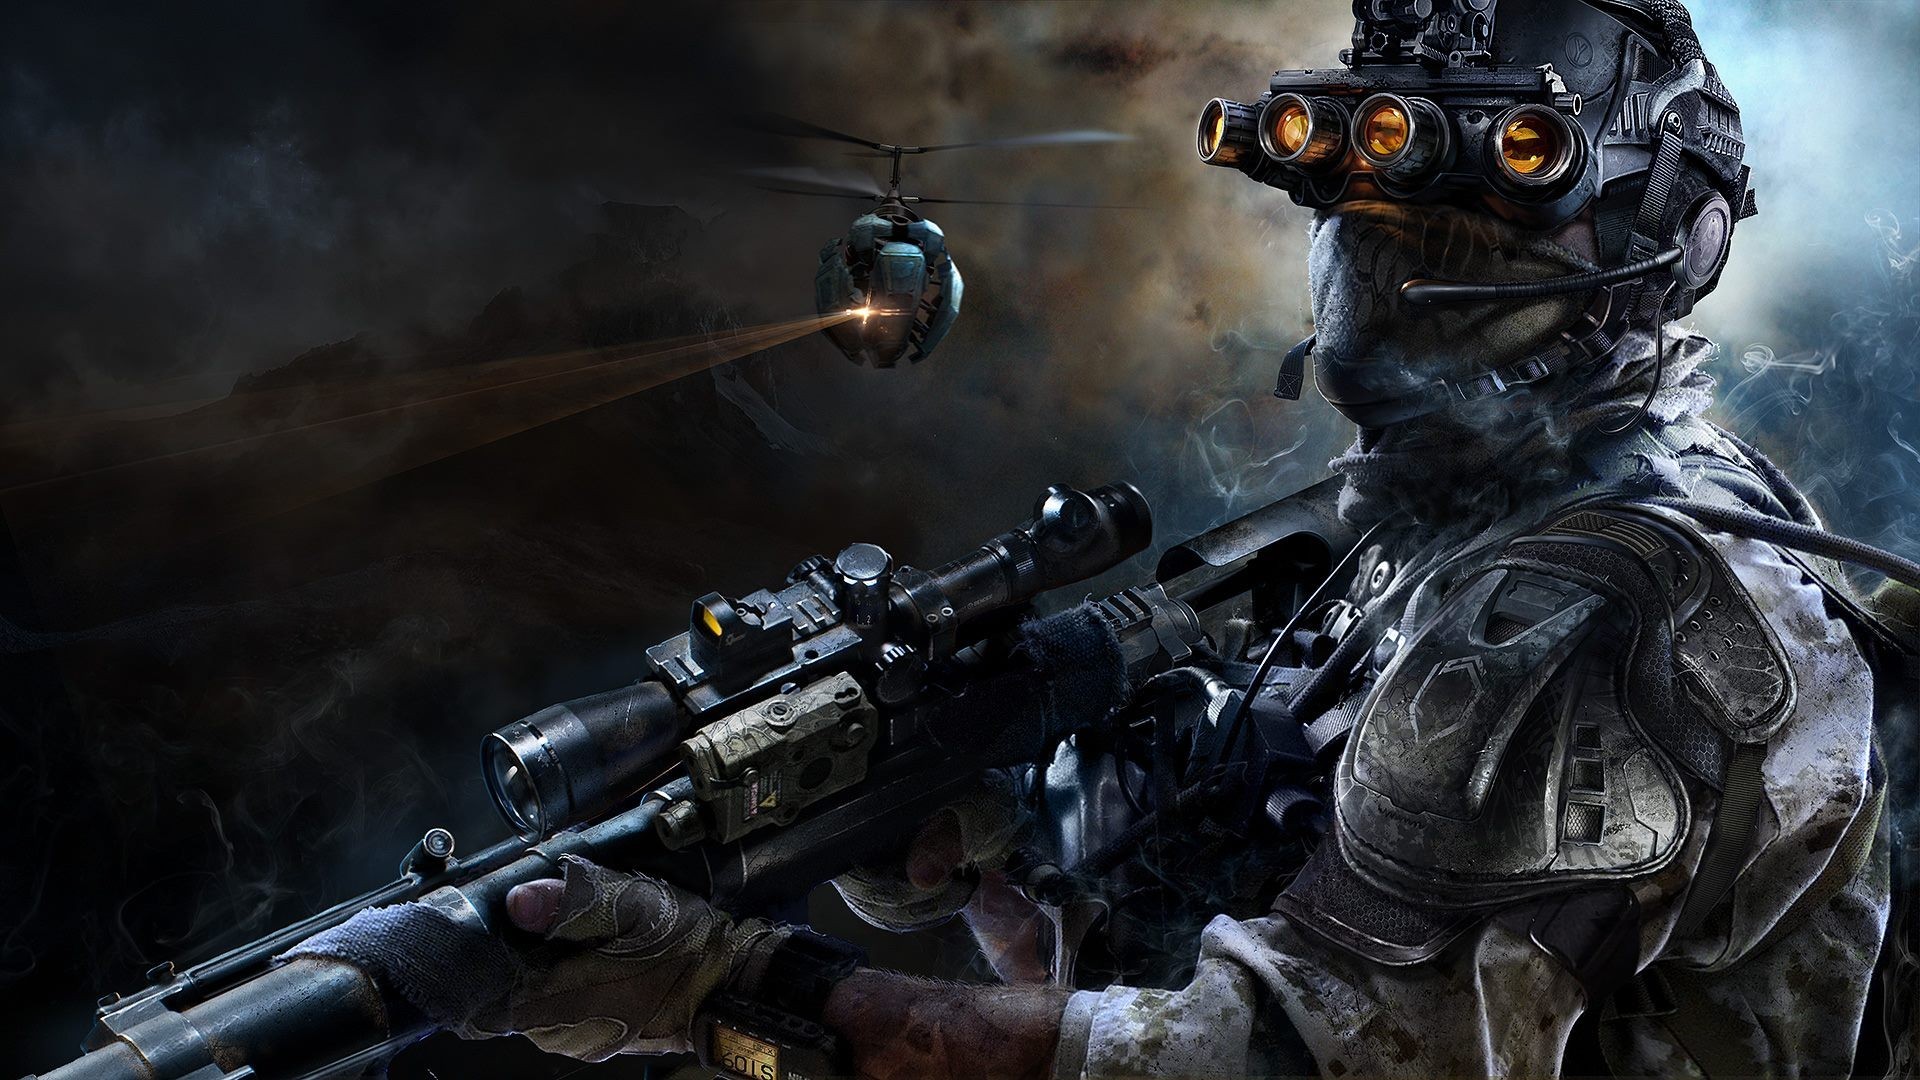 Sniper Ghost Warrior 3 wallpapers cool